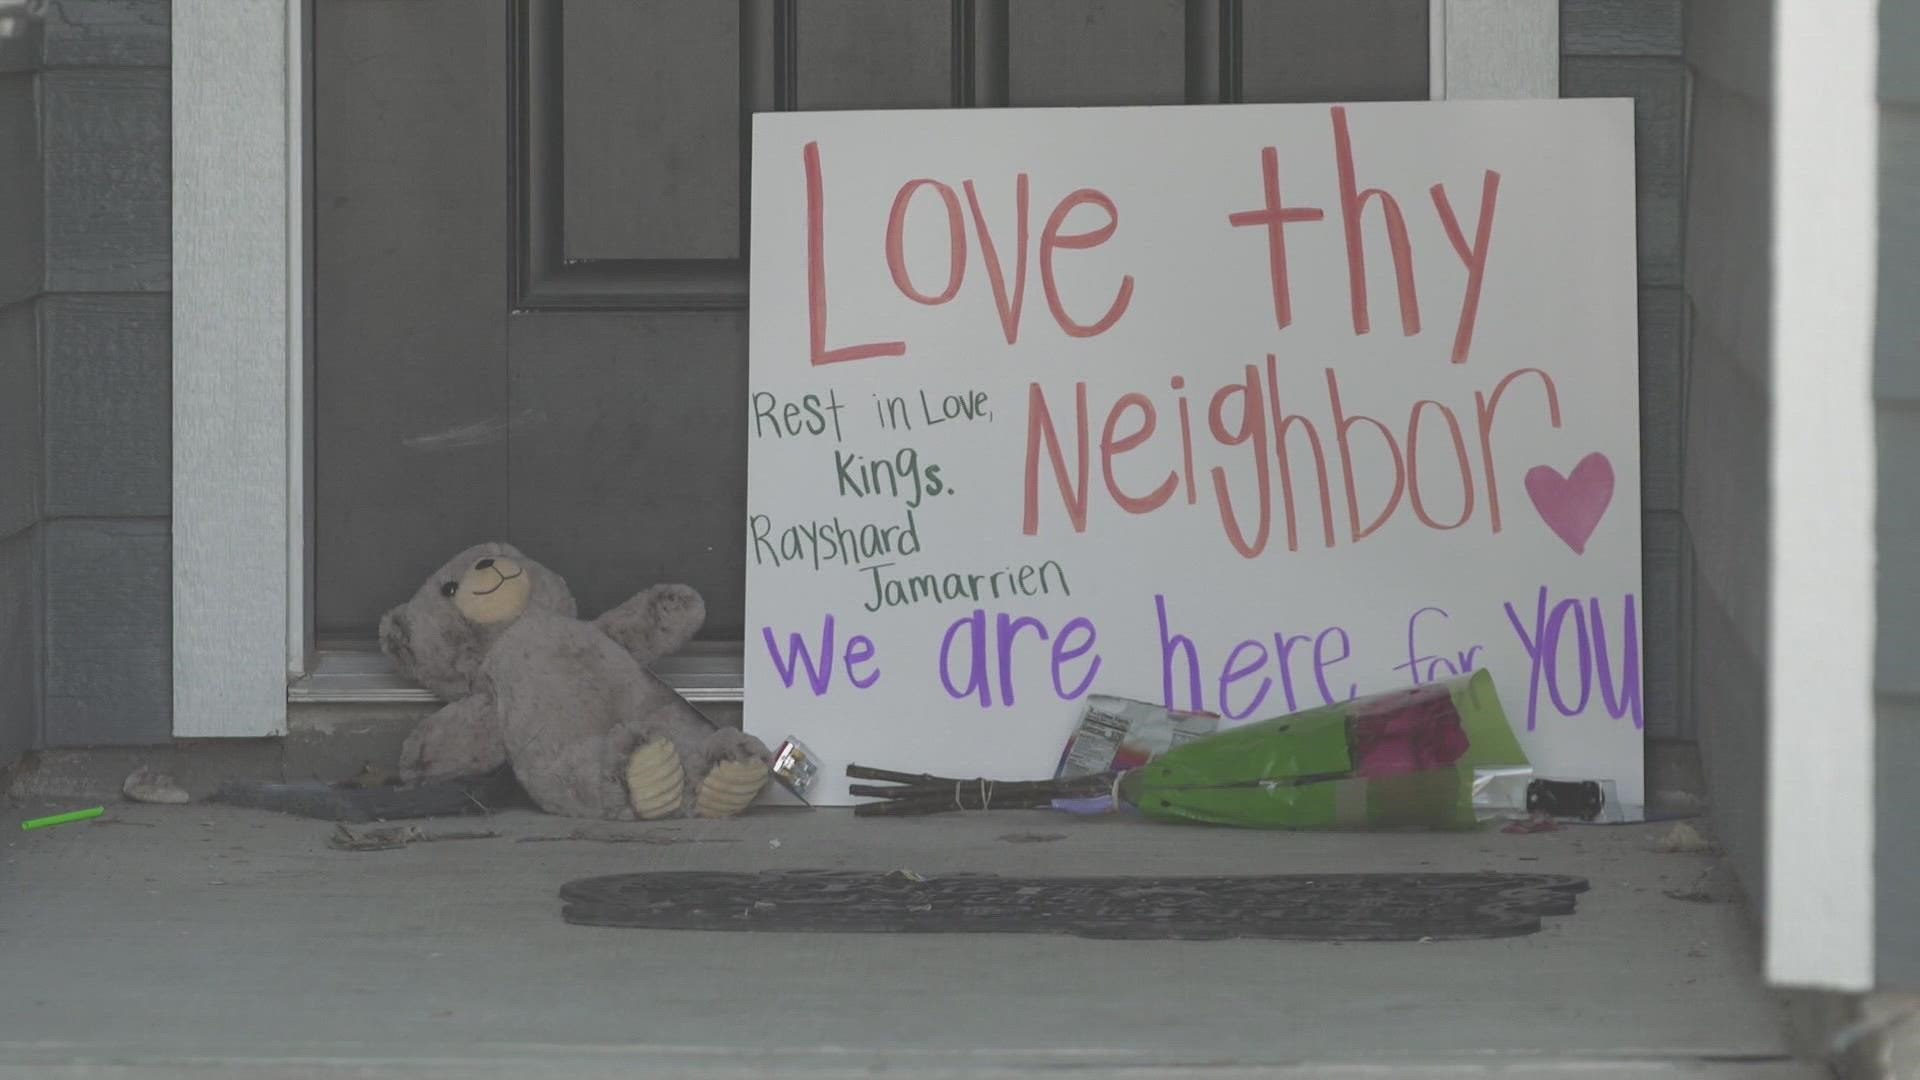 Neighbors are still coming to terms with what happened when a 5-year-old boy and 17-year-old were both killed in a drive-by shooting.